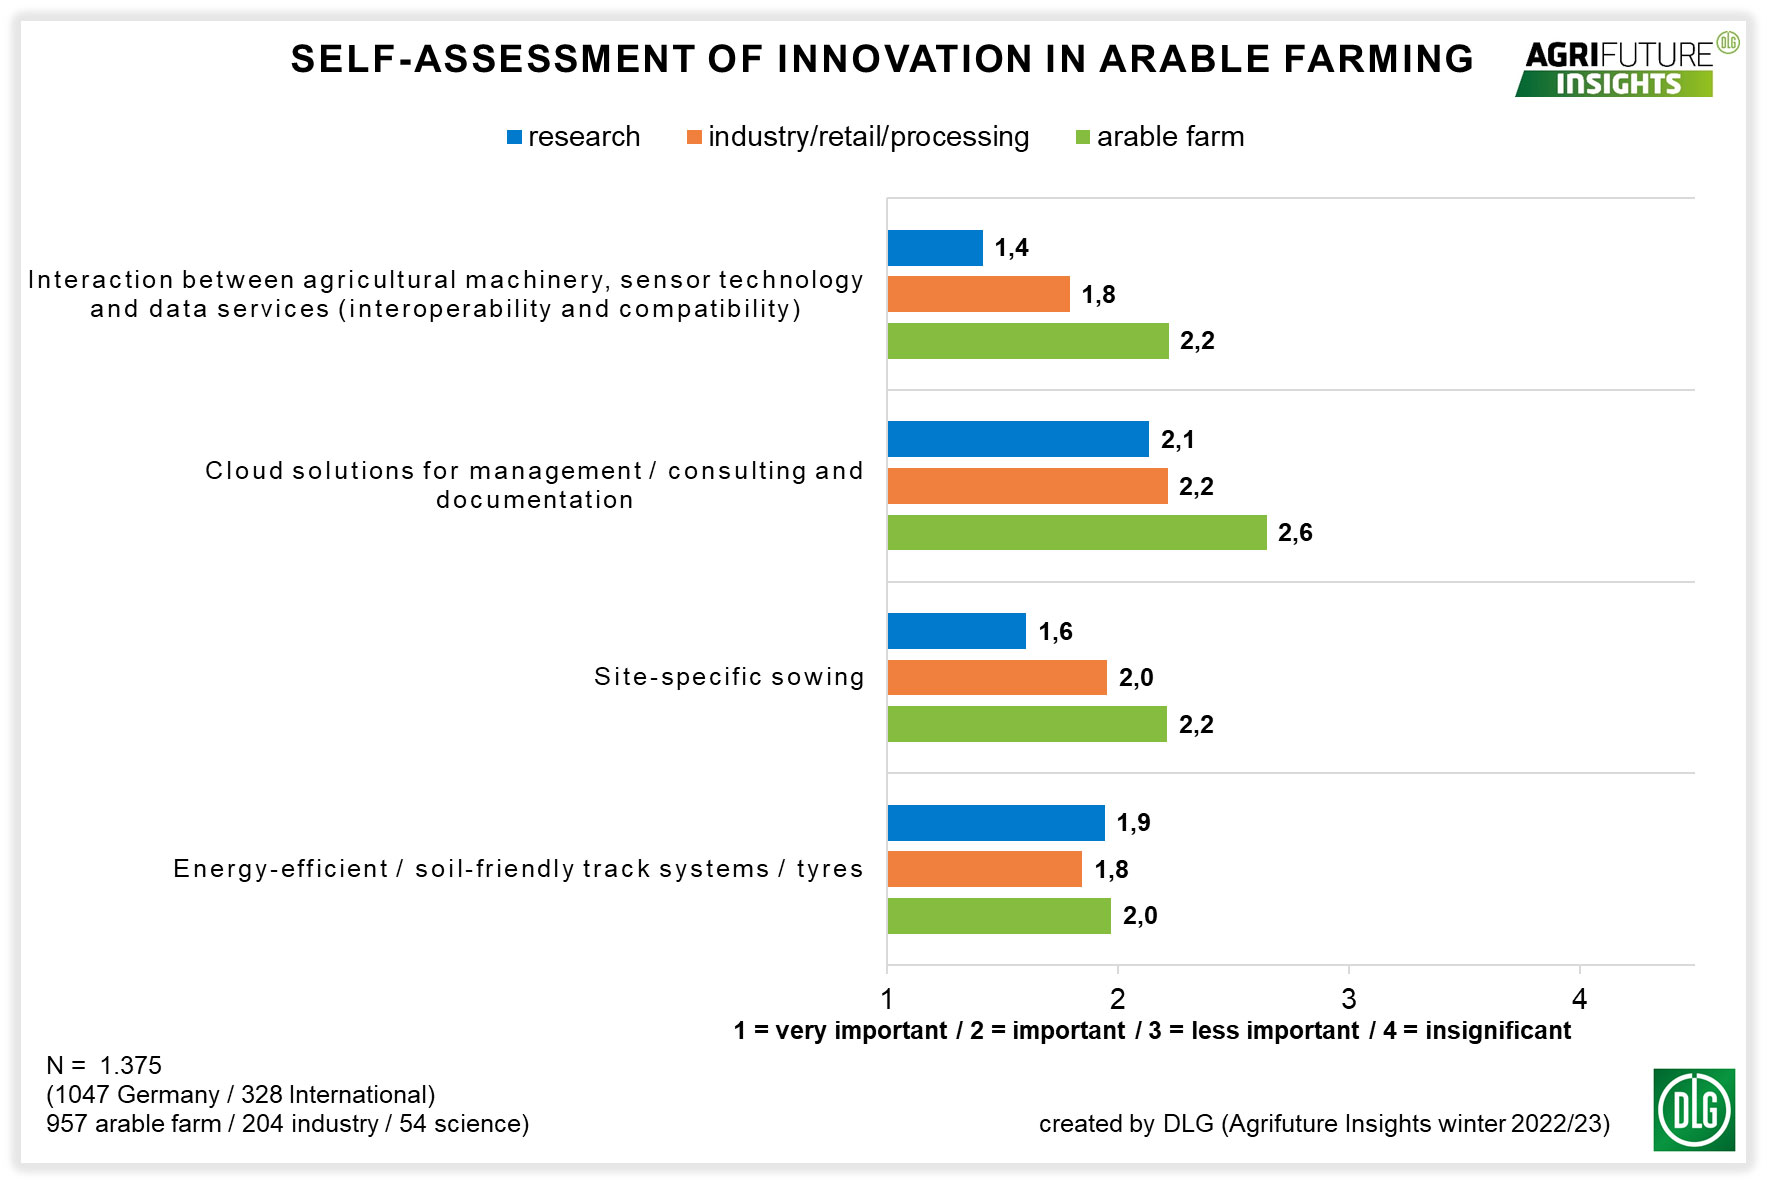 Graphic 3: Self-assessment of innovation in arable farming